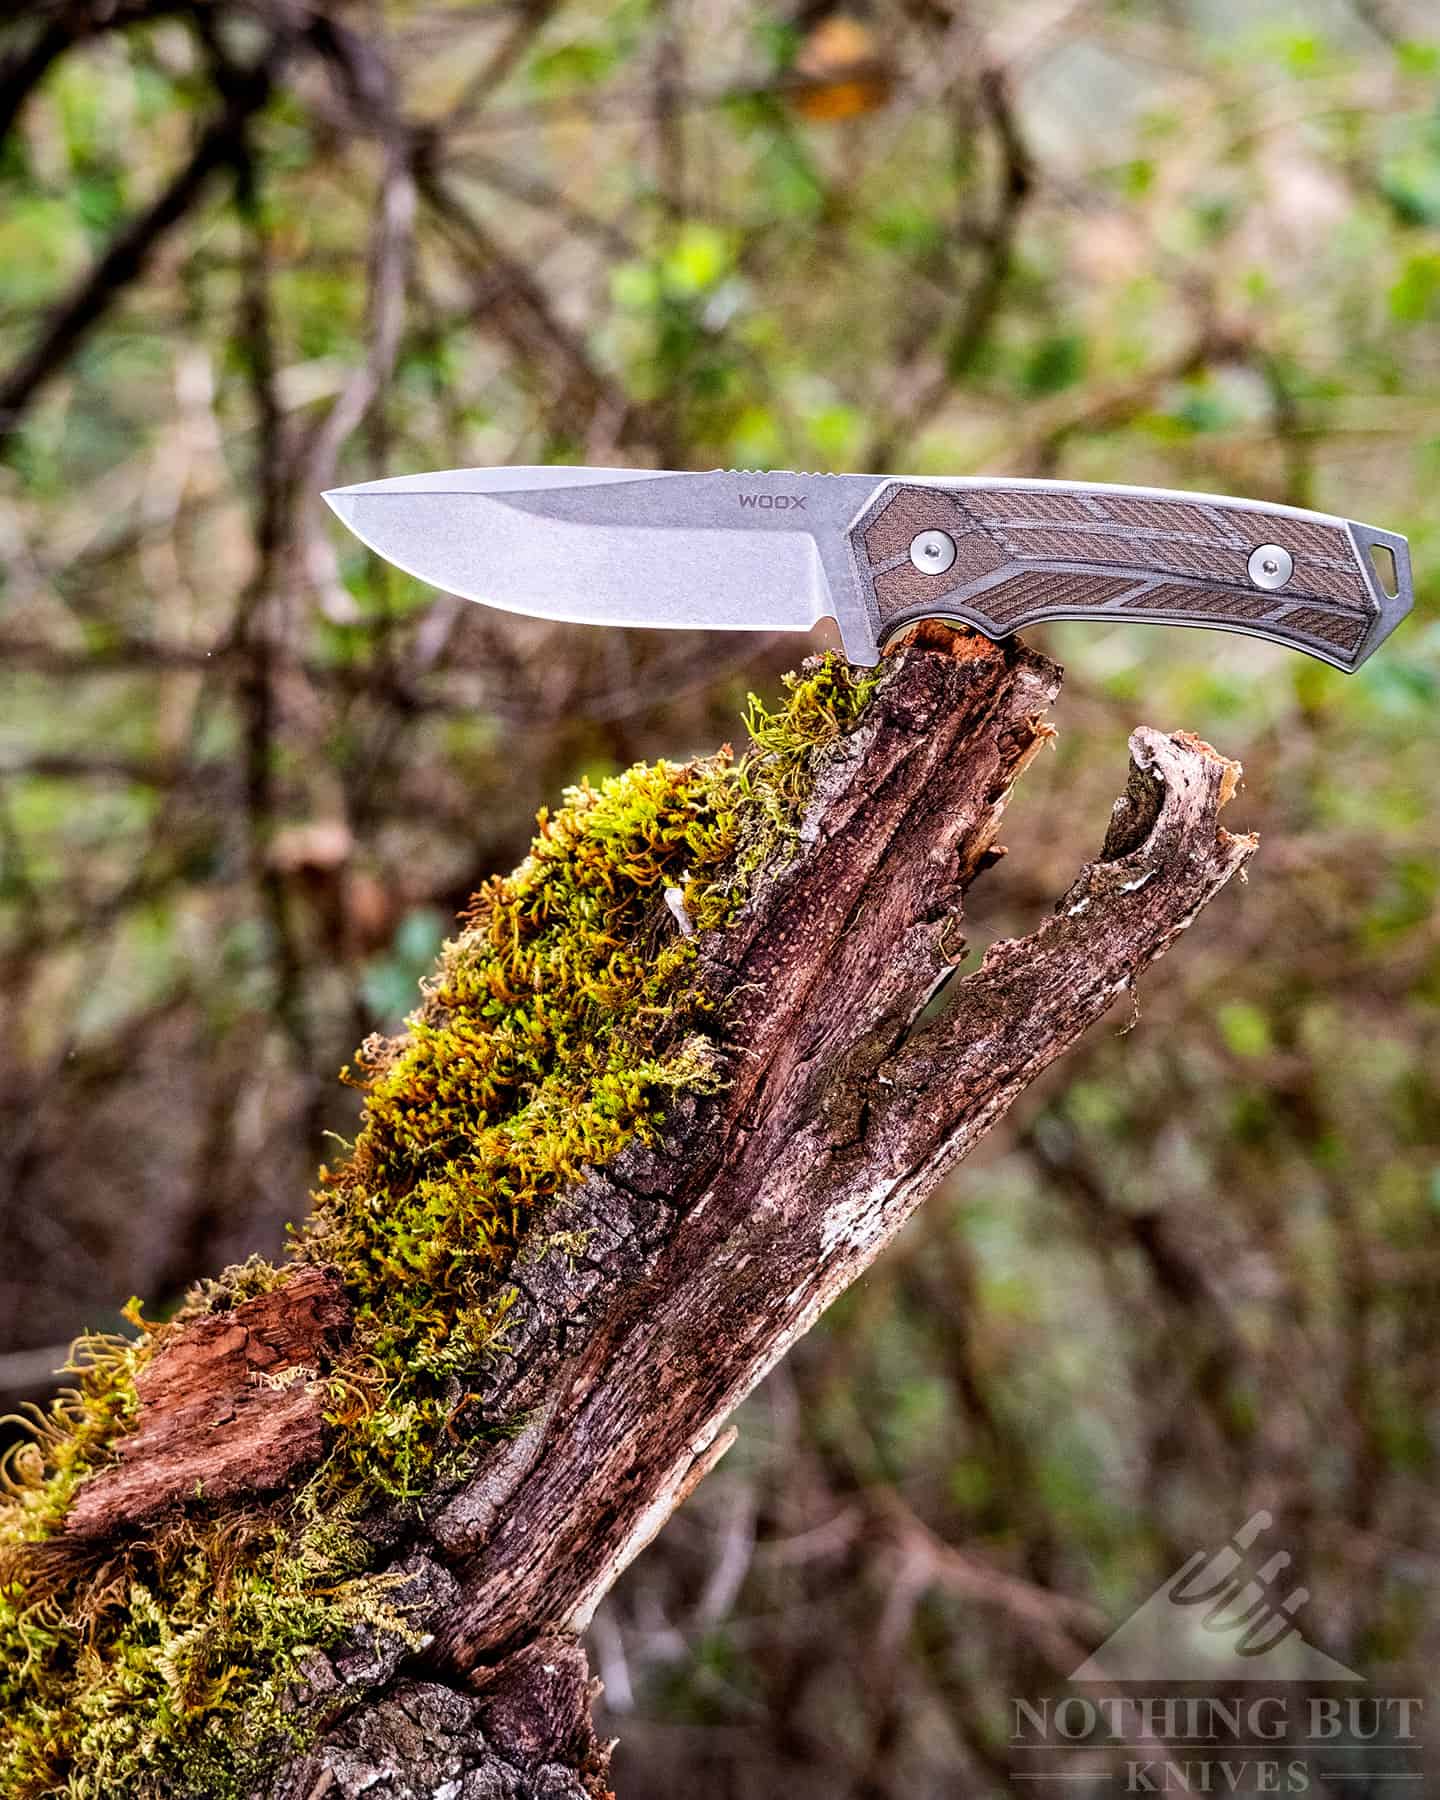 The Woox Rock 62 Survival knife is right at home in the forest.